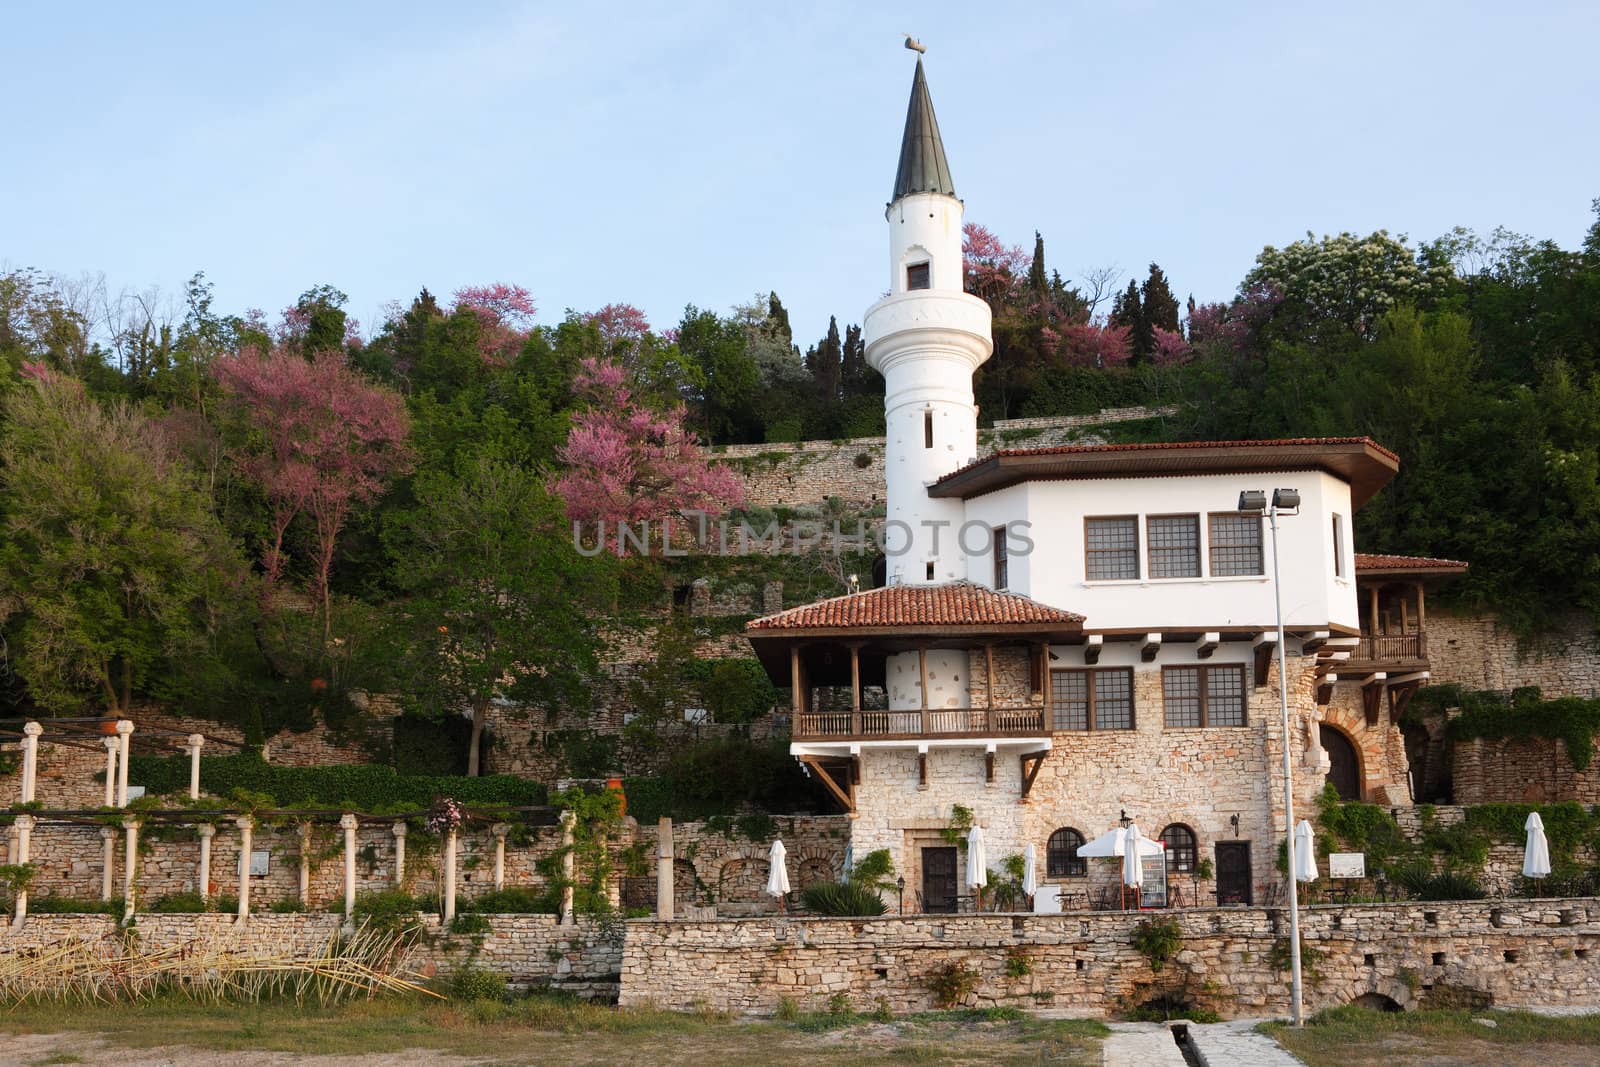 Balchik, the palace with the tower from East by ecobo